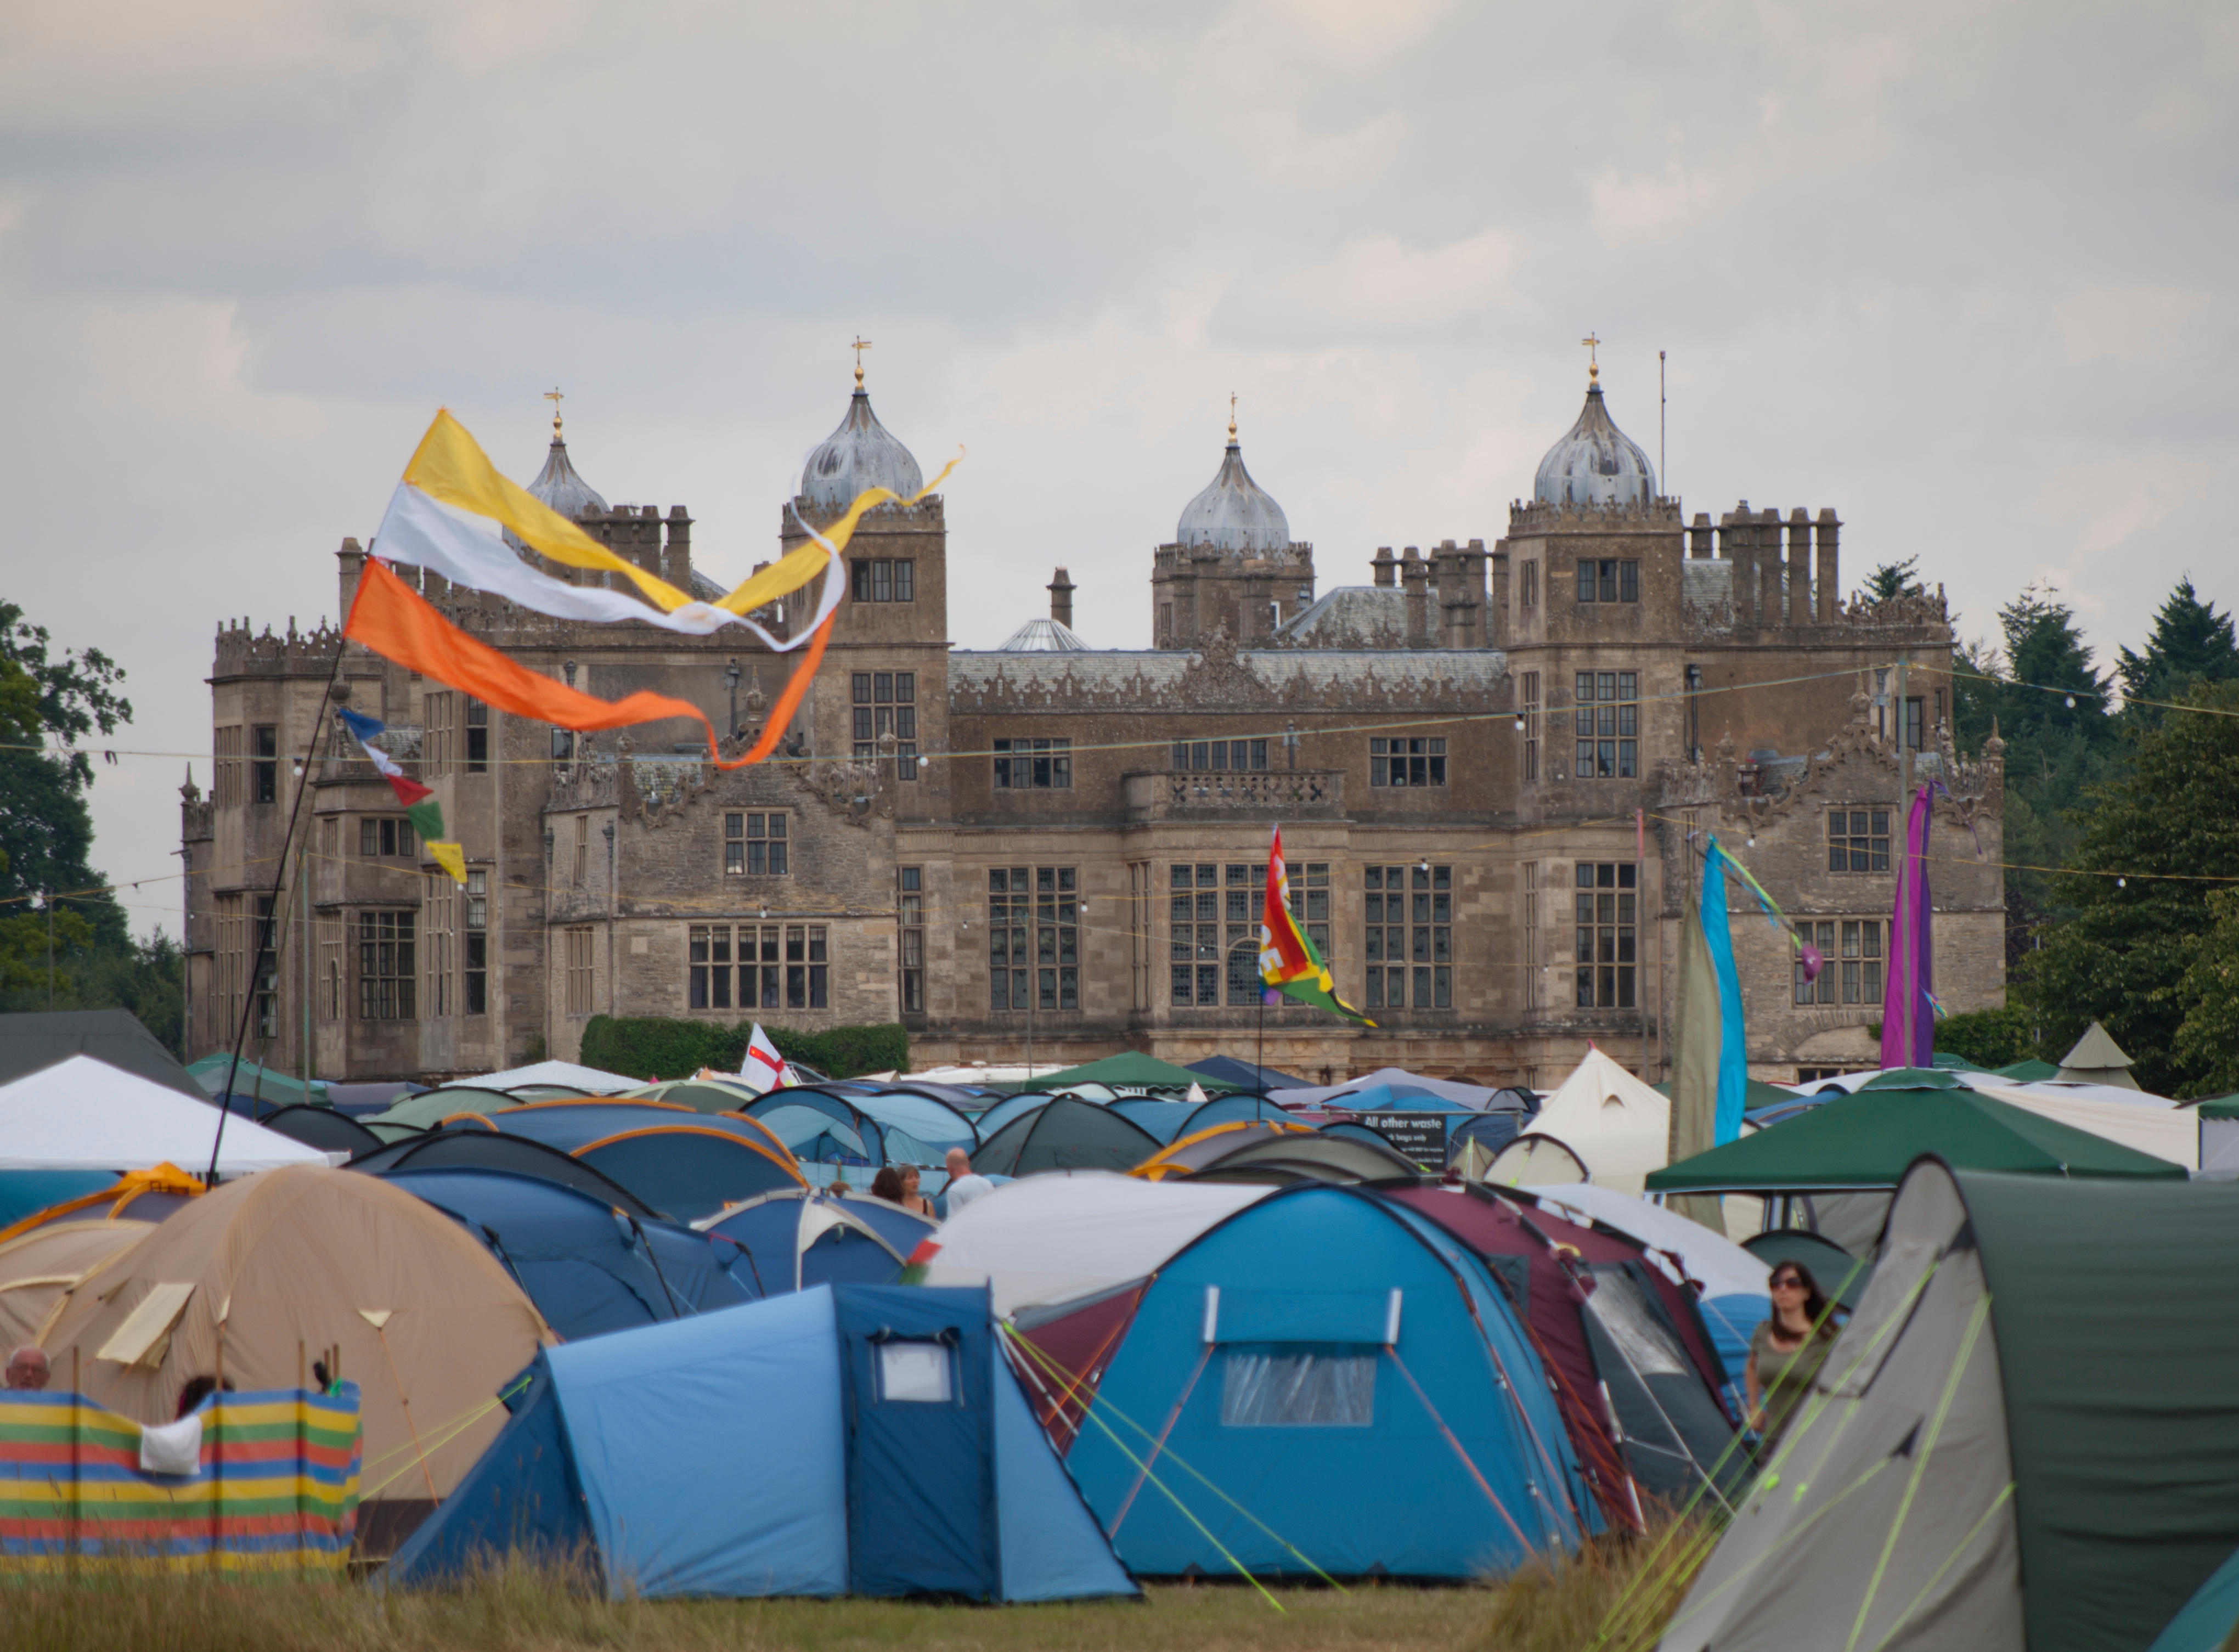 Womad takes place at Charlton Park Estate in Wiltshire and is being held 25-28 July this year